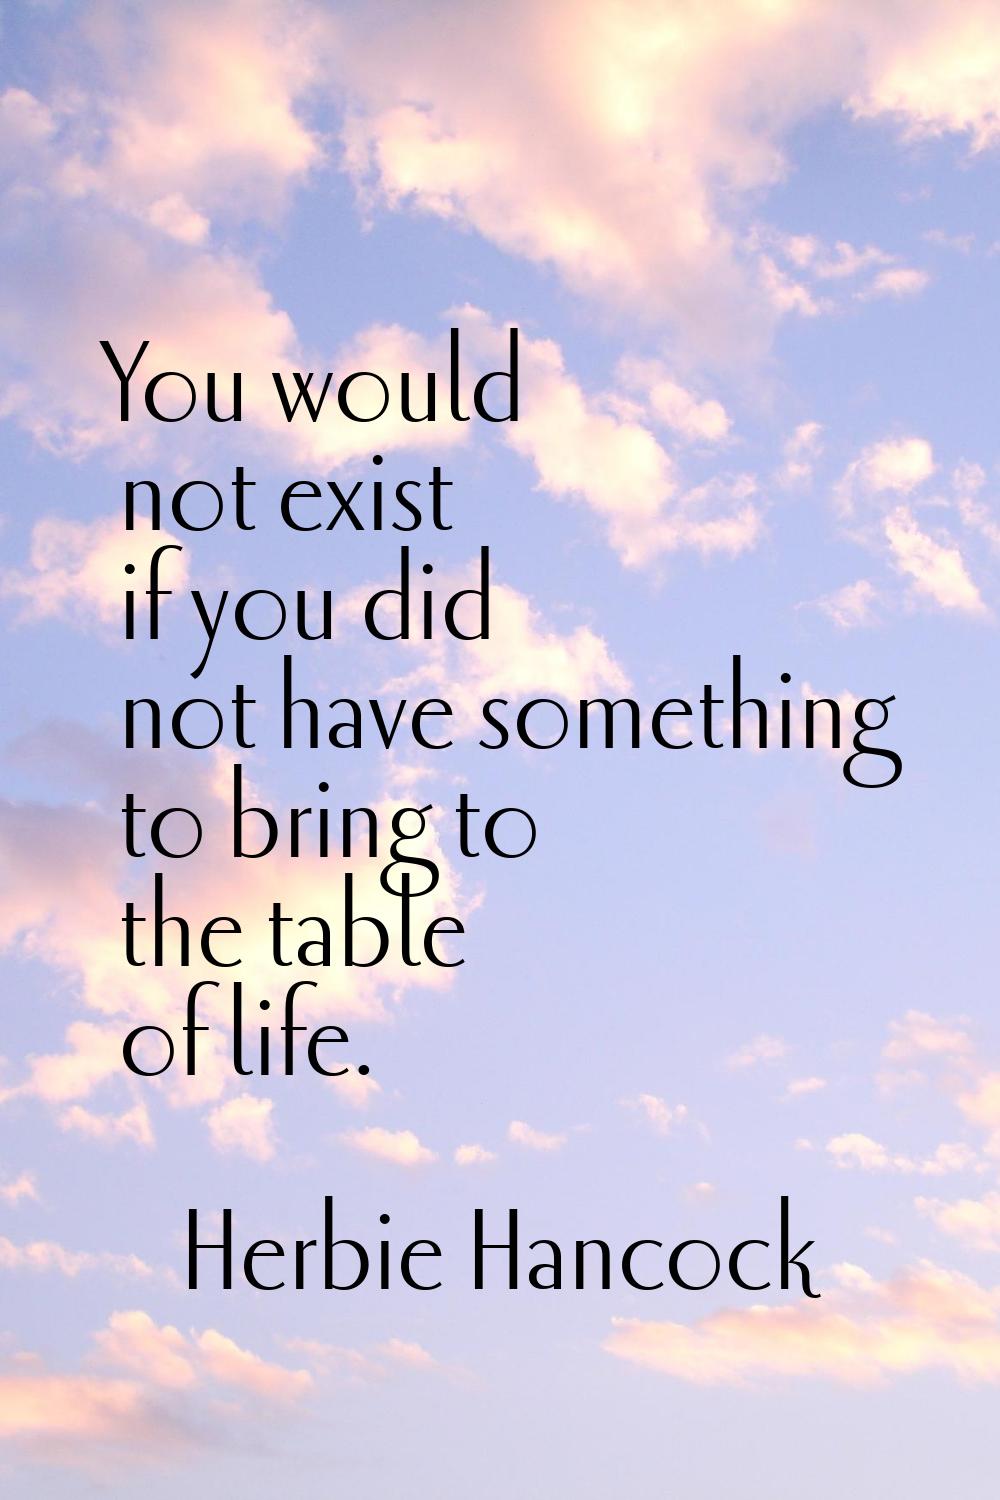 You would not exist if you did not have something to bring to the table of life.